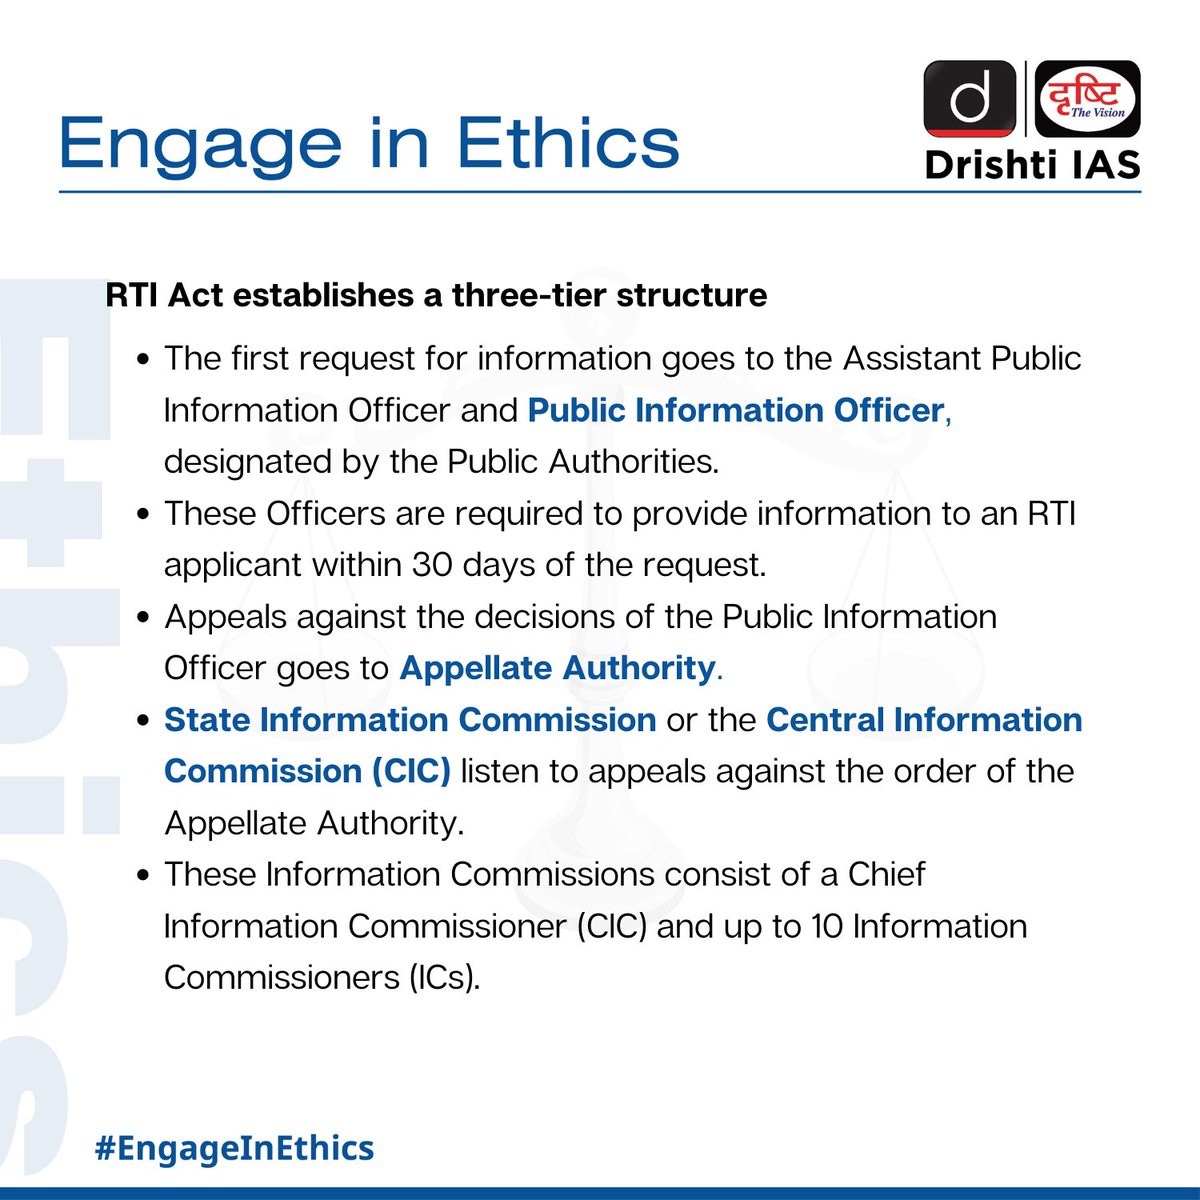 #EngageInEthics to brush up your problem-solving approach to various issues and conflicts in society. Read to learn more about this wonderful subject! 

#DrishtiGuideToGS #Ethics #Governance #Ethical #GS4 #UPSC #IAS #CSE #UPSCPrelims #Prelims2023 #DrishtiIAS #DrishtiIASEnglish